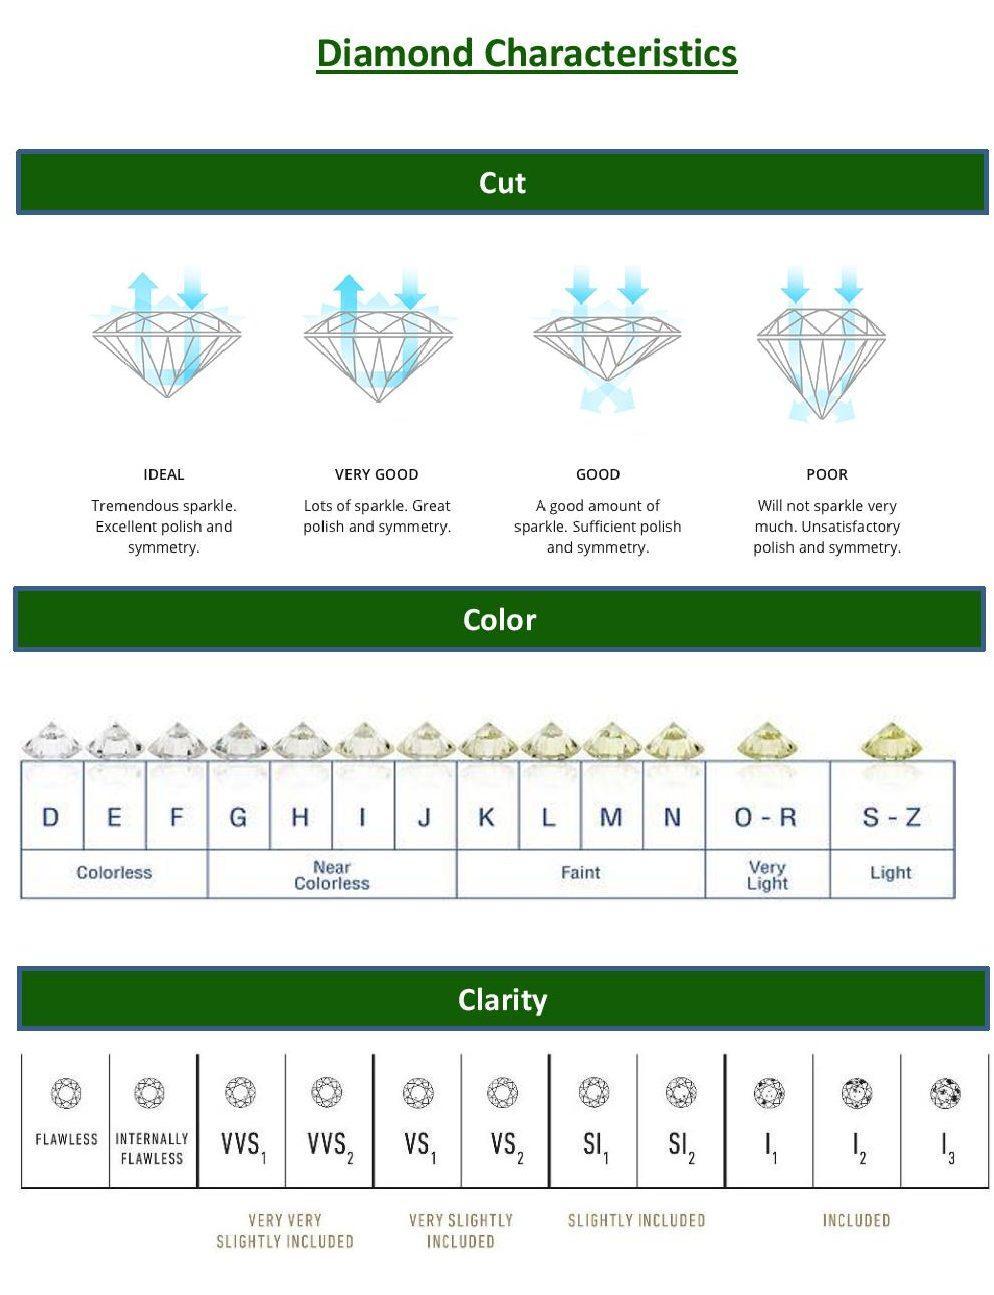 Monet teer Slagschip The 4C's of Diamond Grading-All You Need to Know - DW Gem Services, LLC